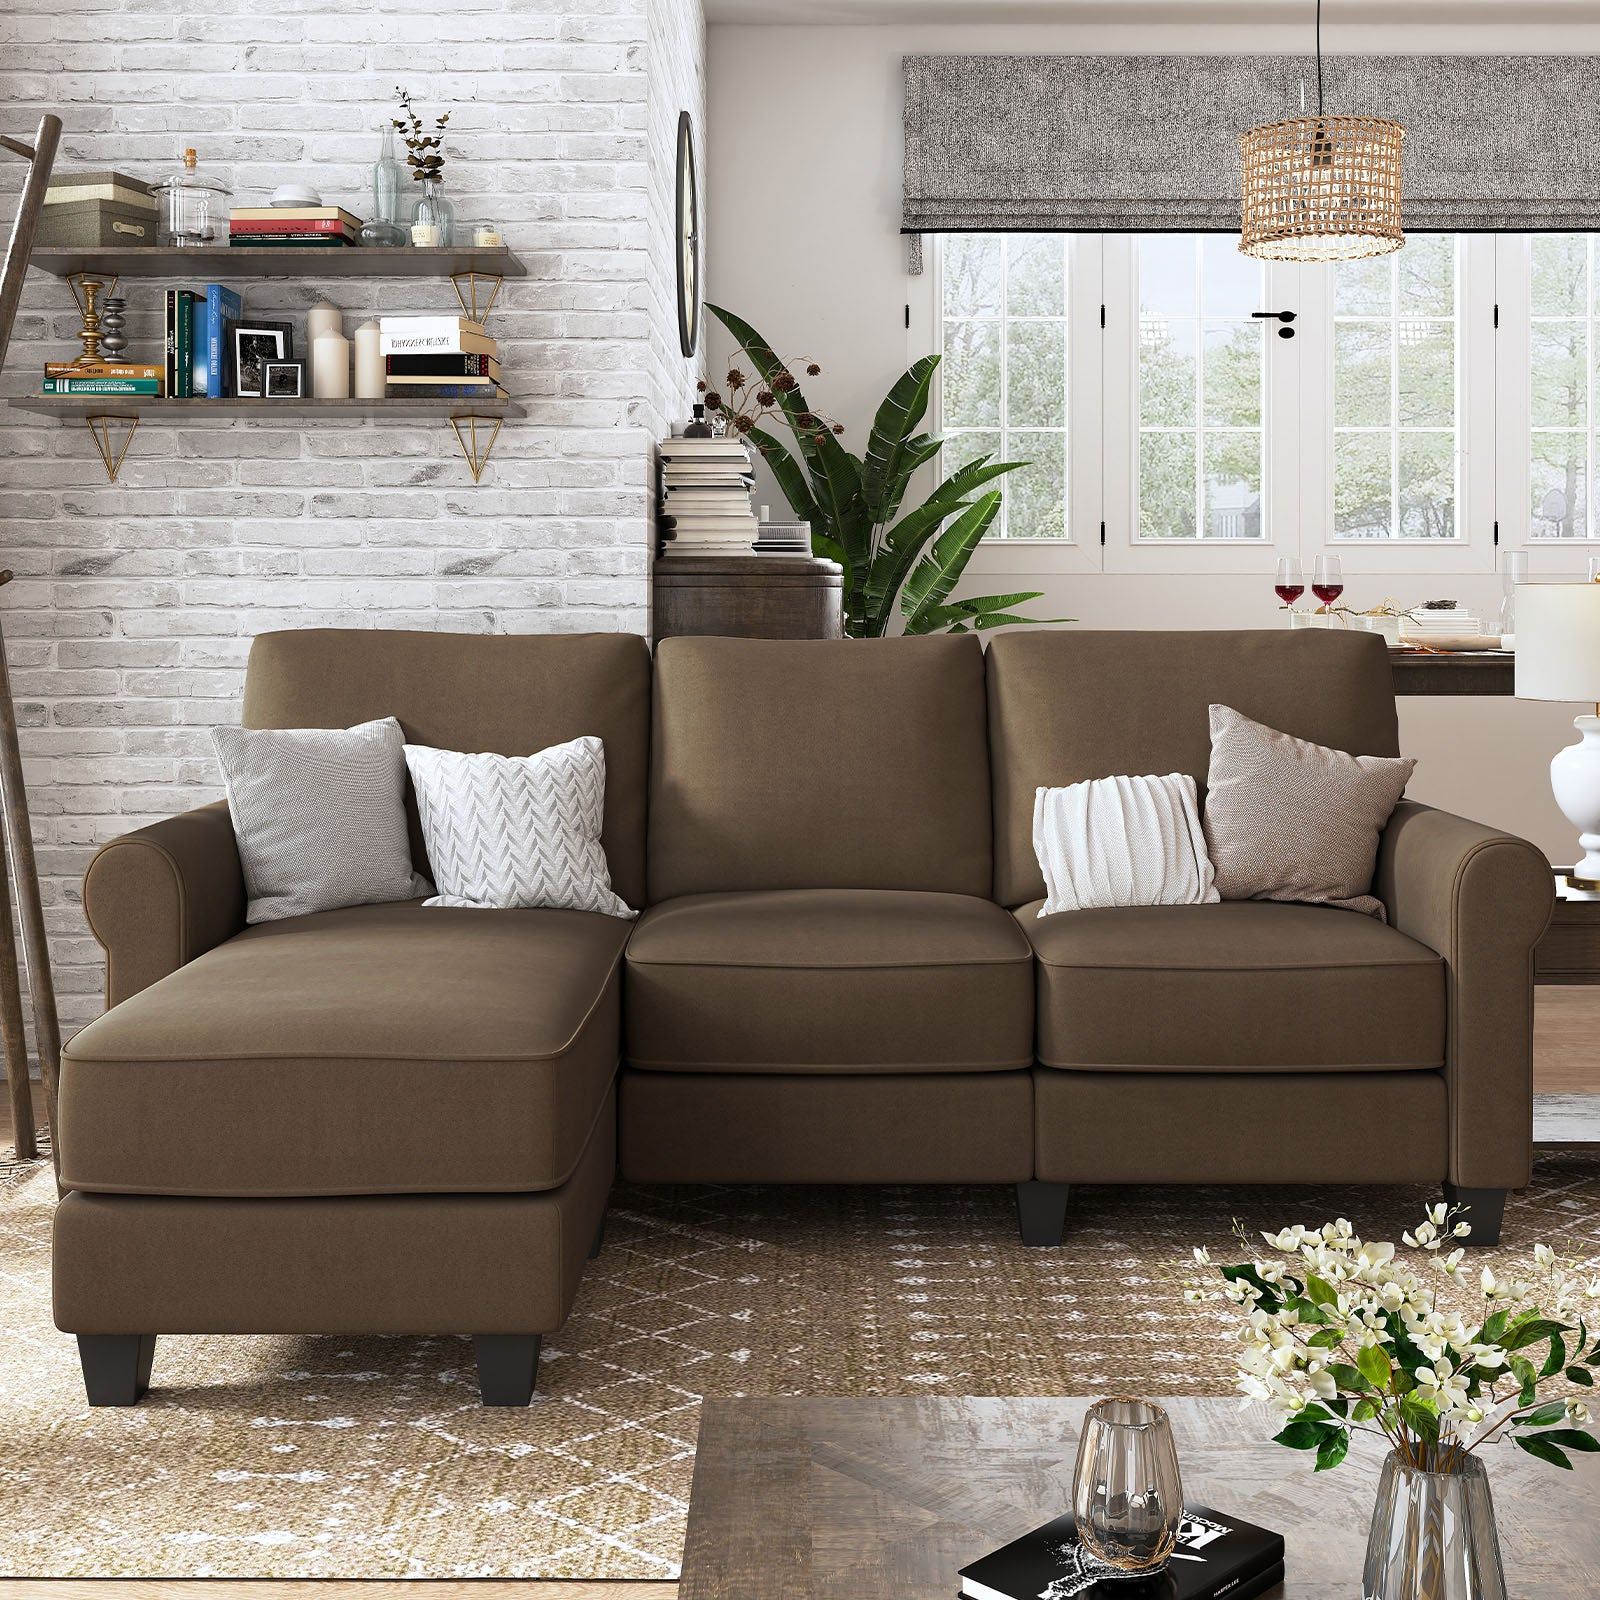 Nolany 3 Seat L Shaped Reversible Sectional Sofa Couch | Nolany Intended For L Shape Couches With Reversible Chaises (View 10 of 20)